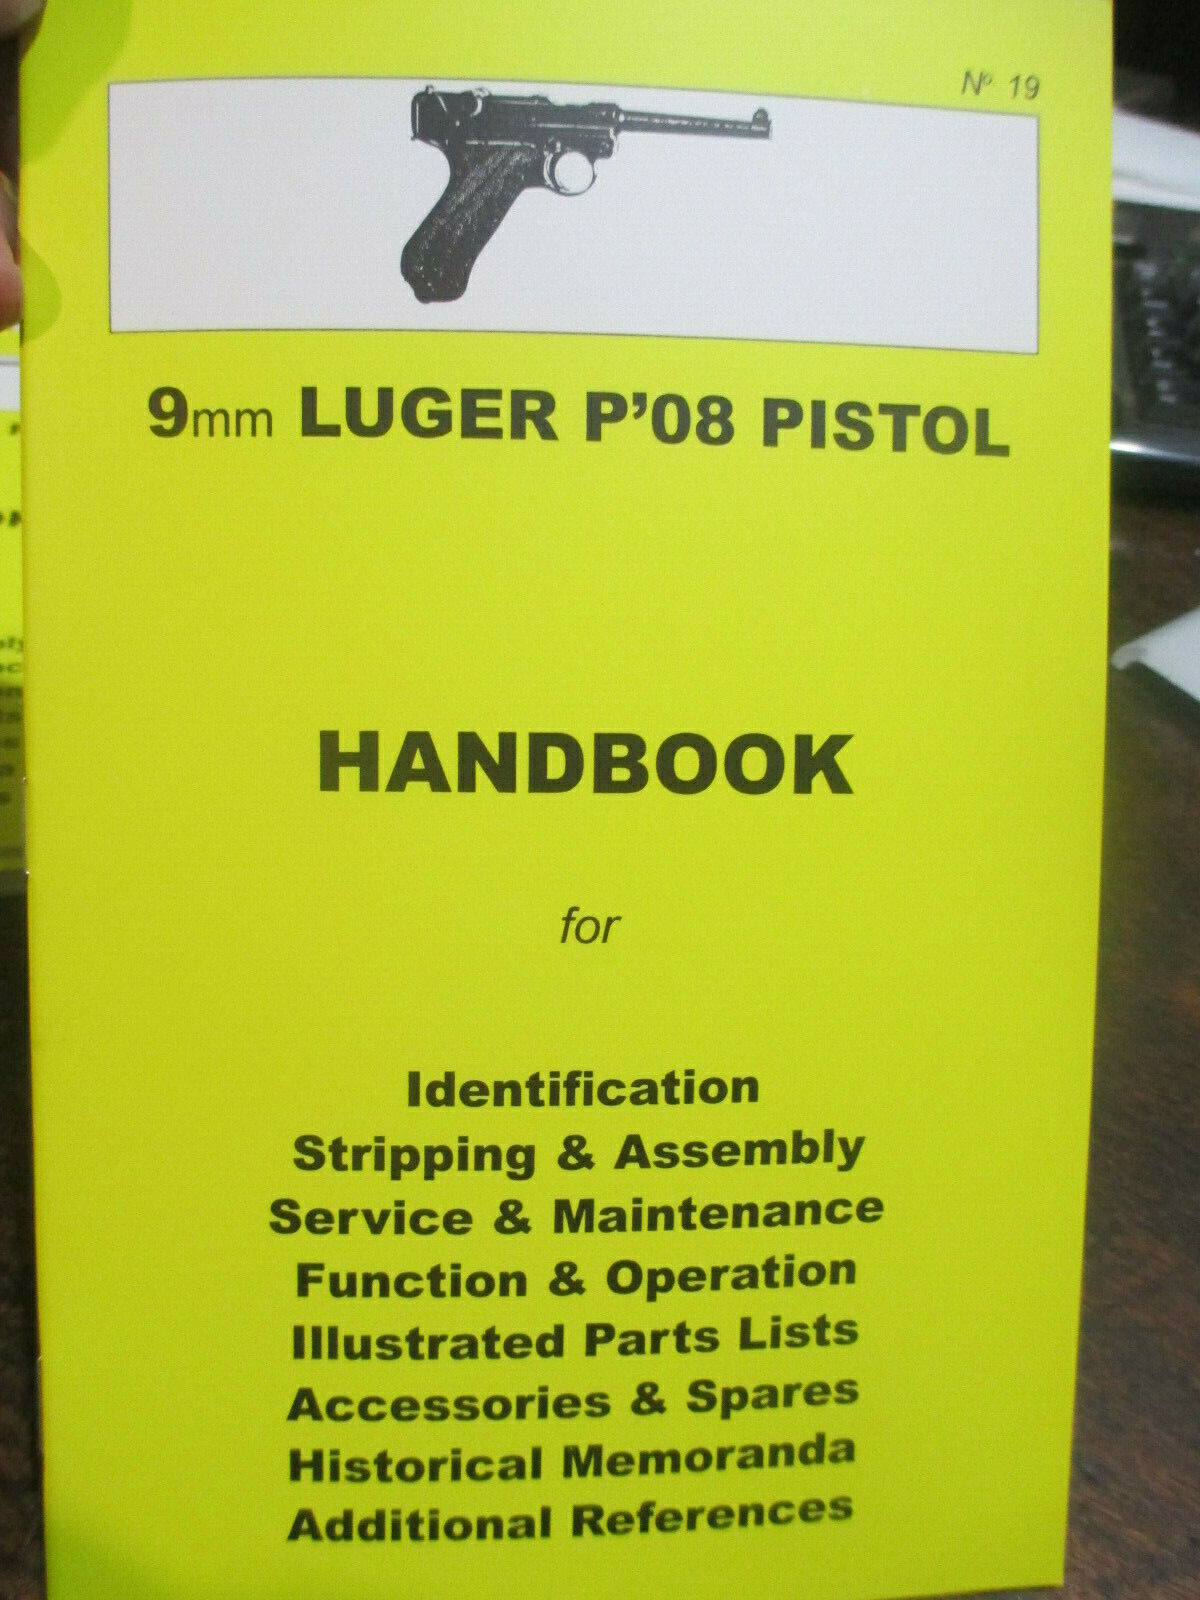 9mm LUGER P\'08 PISTOL HAND BOOK Maintenance Compact In Field Reference Book 19